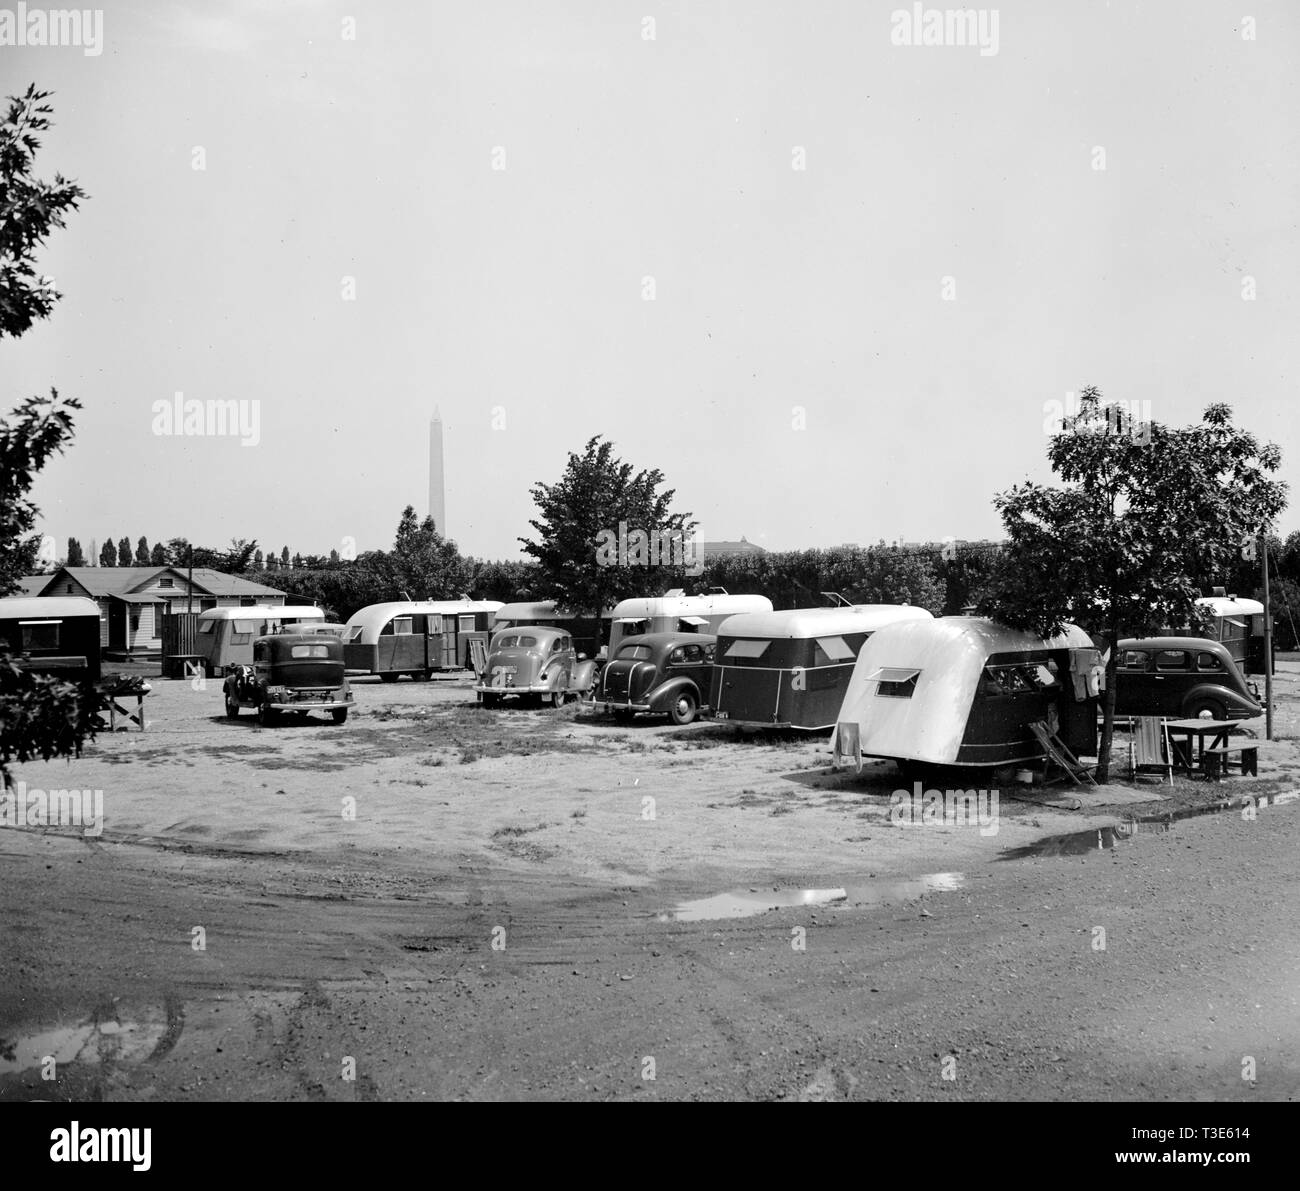 Washington D.C. area trailer camp, parked trailers and cars ca. 1937 (Washington Monument in background) Stock Photo